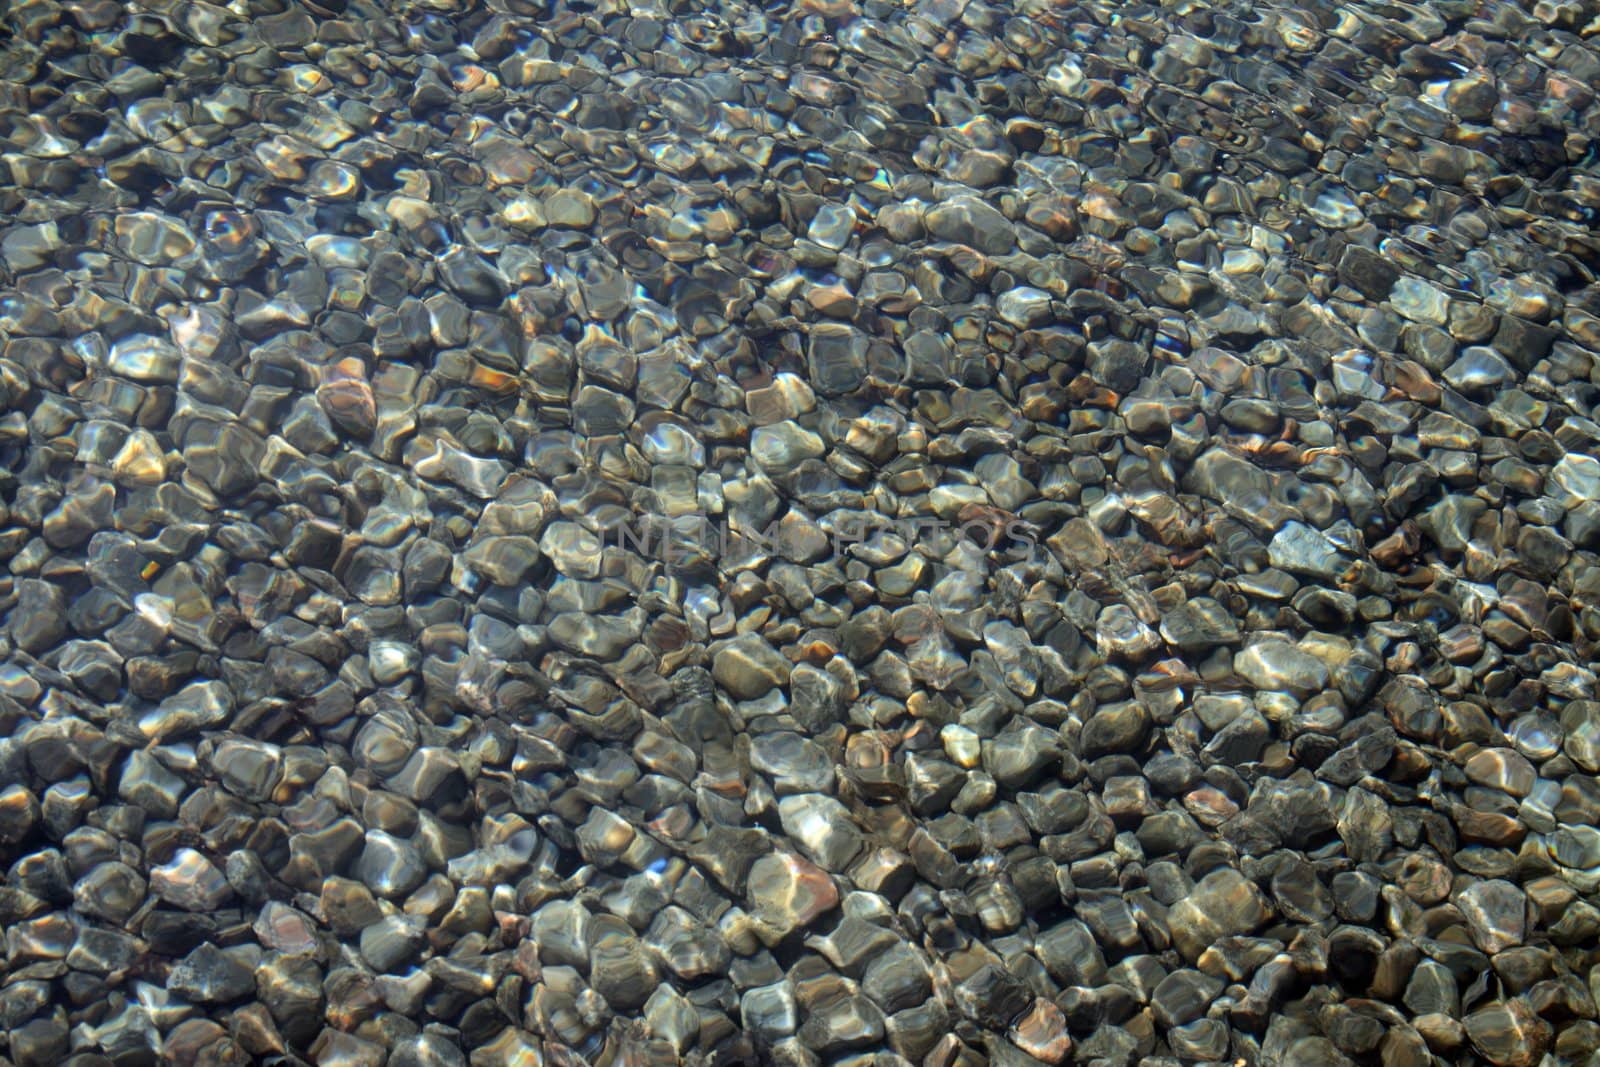 Bottom of a pond covered with stones seen through transparent water.